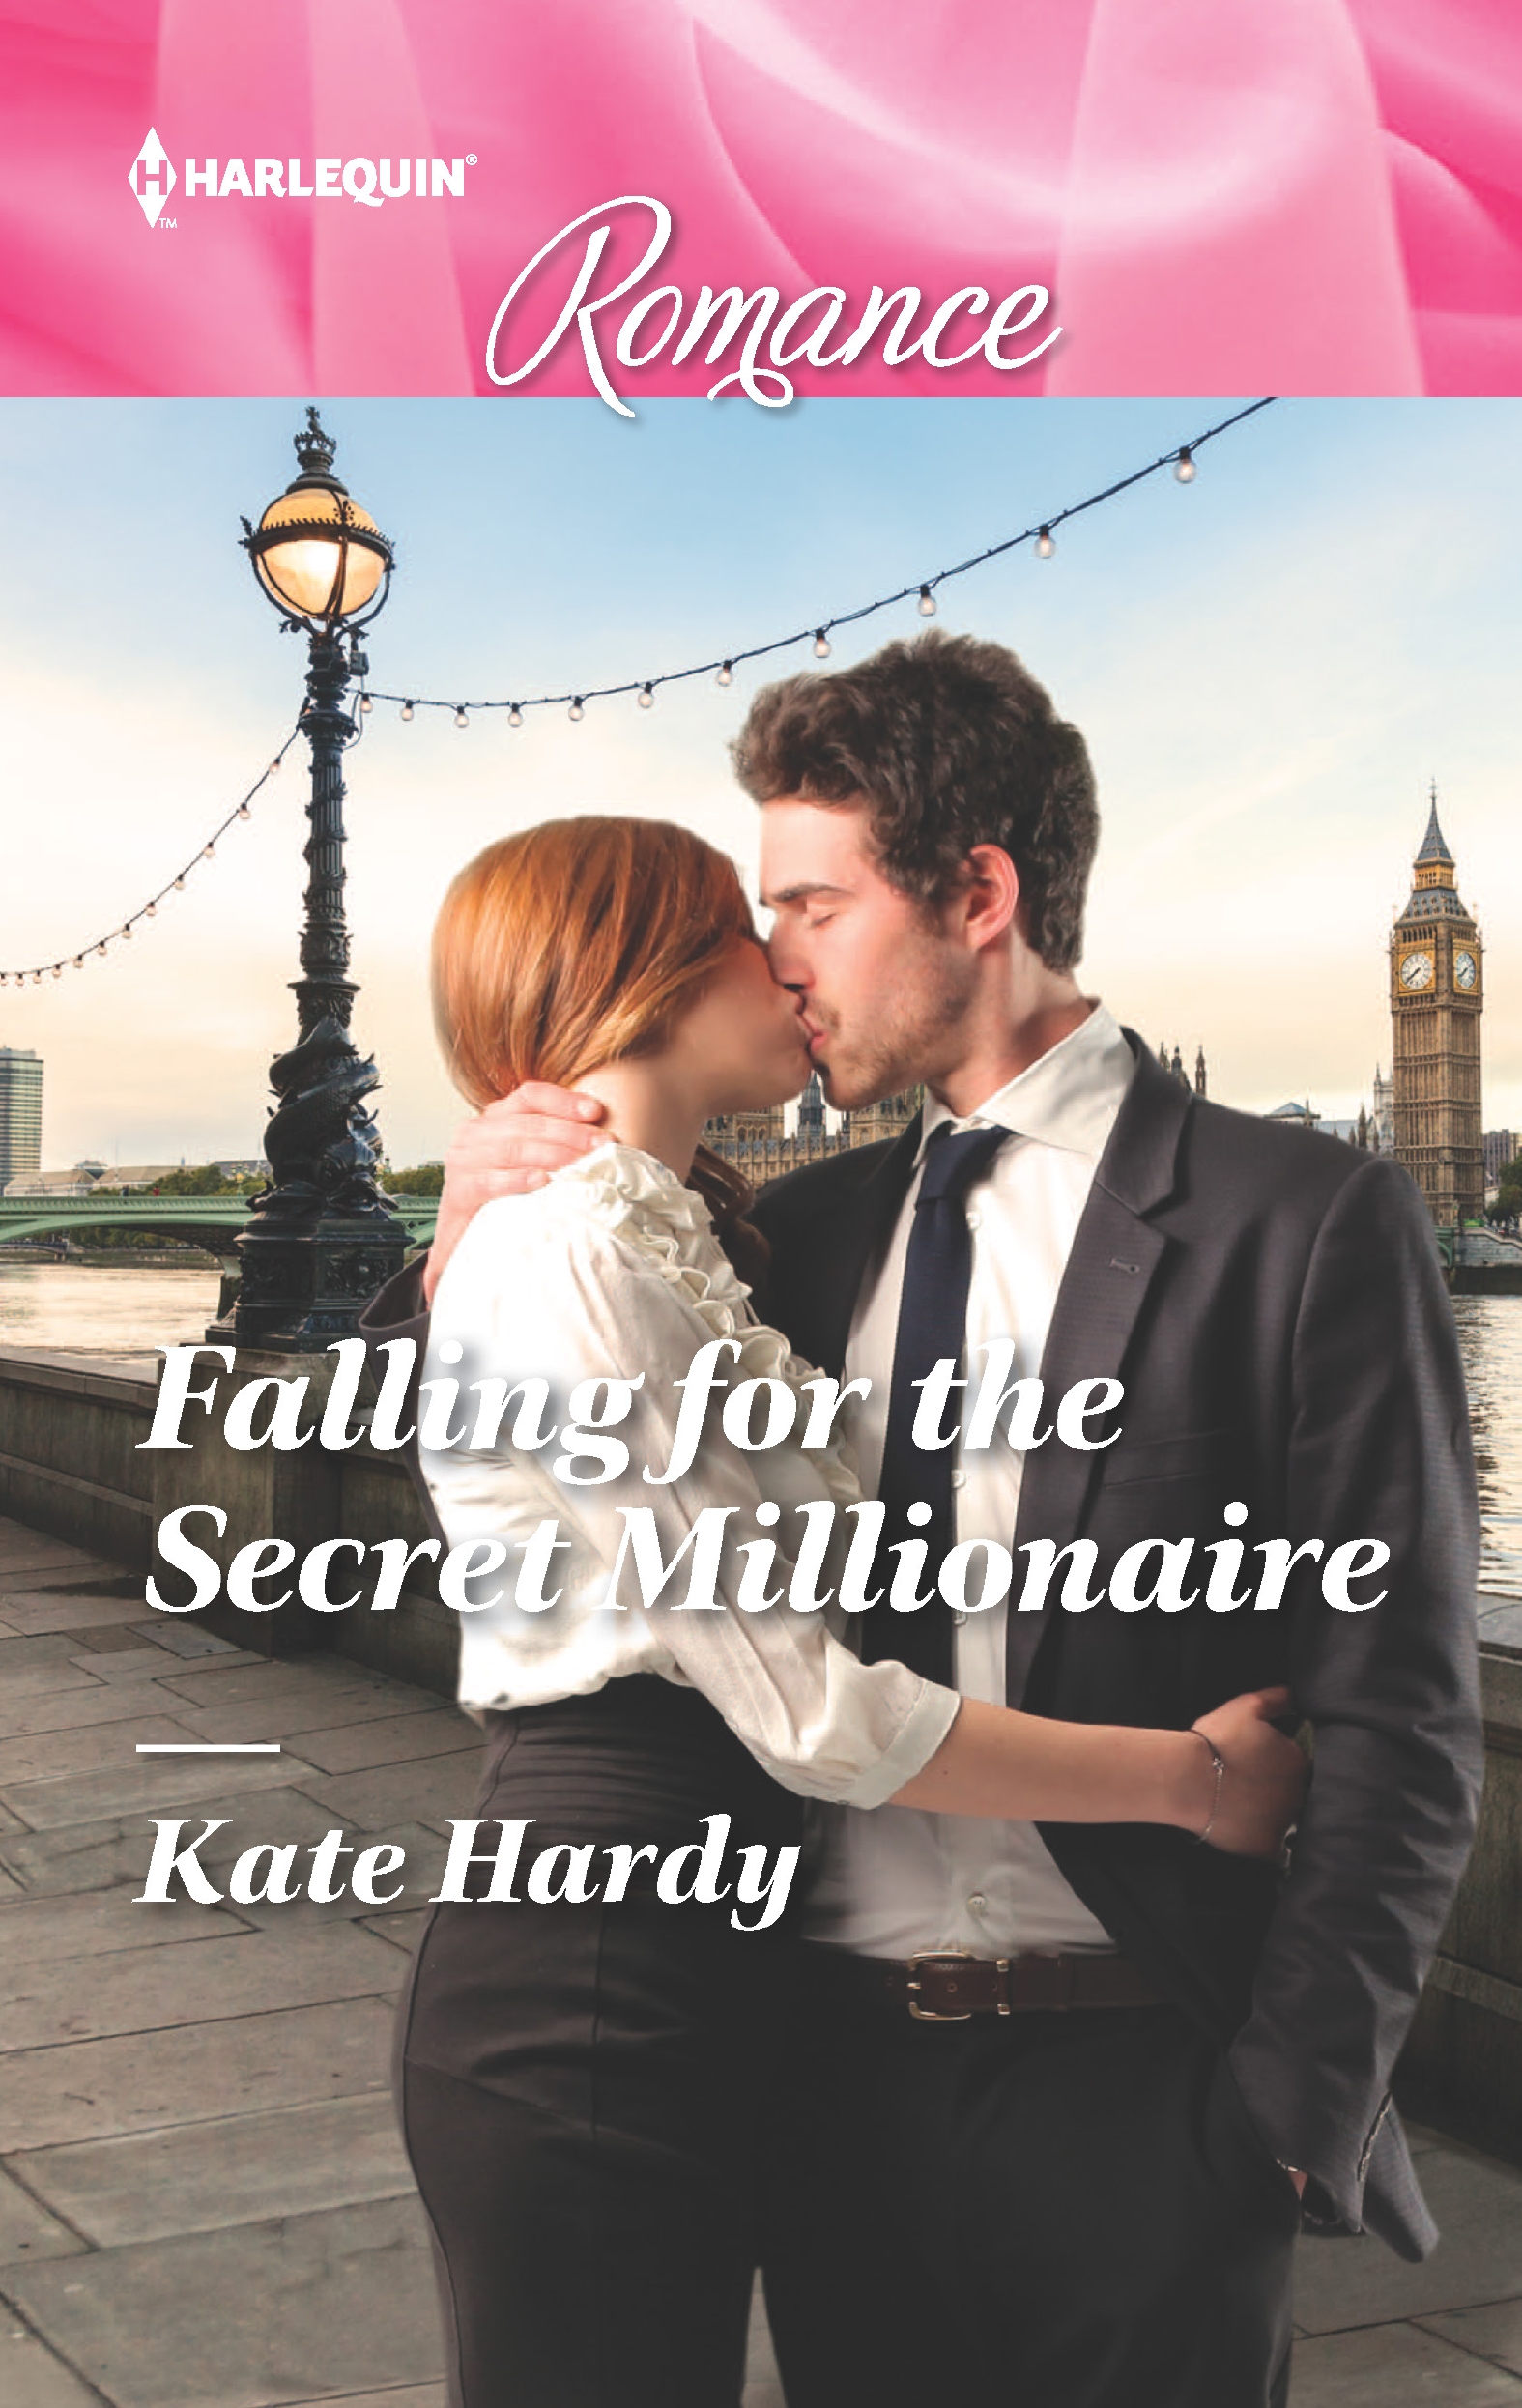 Falling for the Secret Millionaire (2016) by Kate Hardy